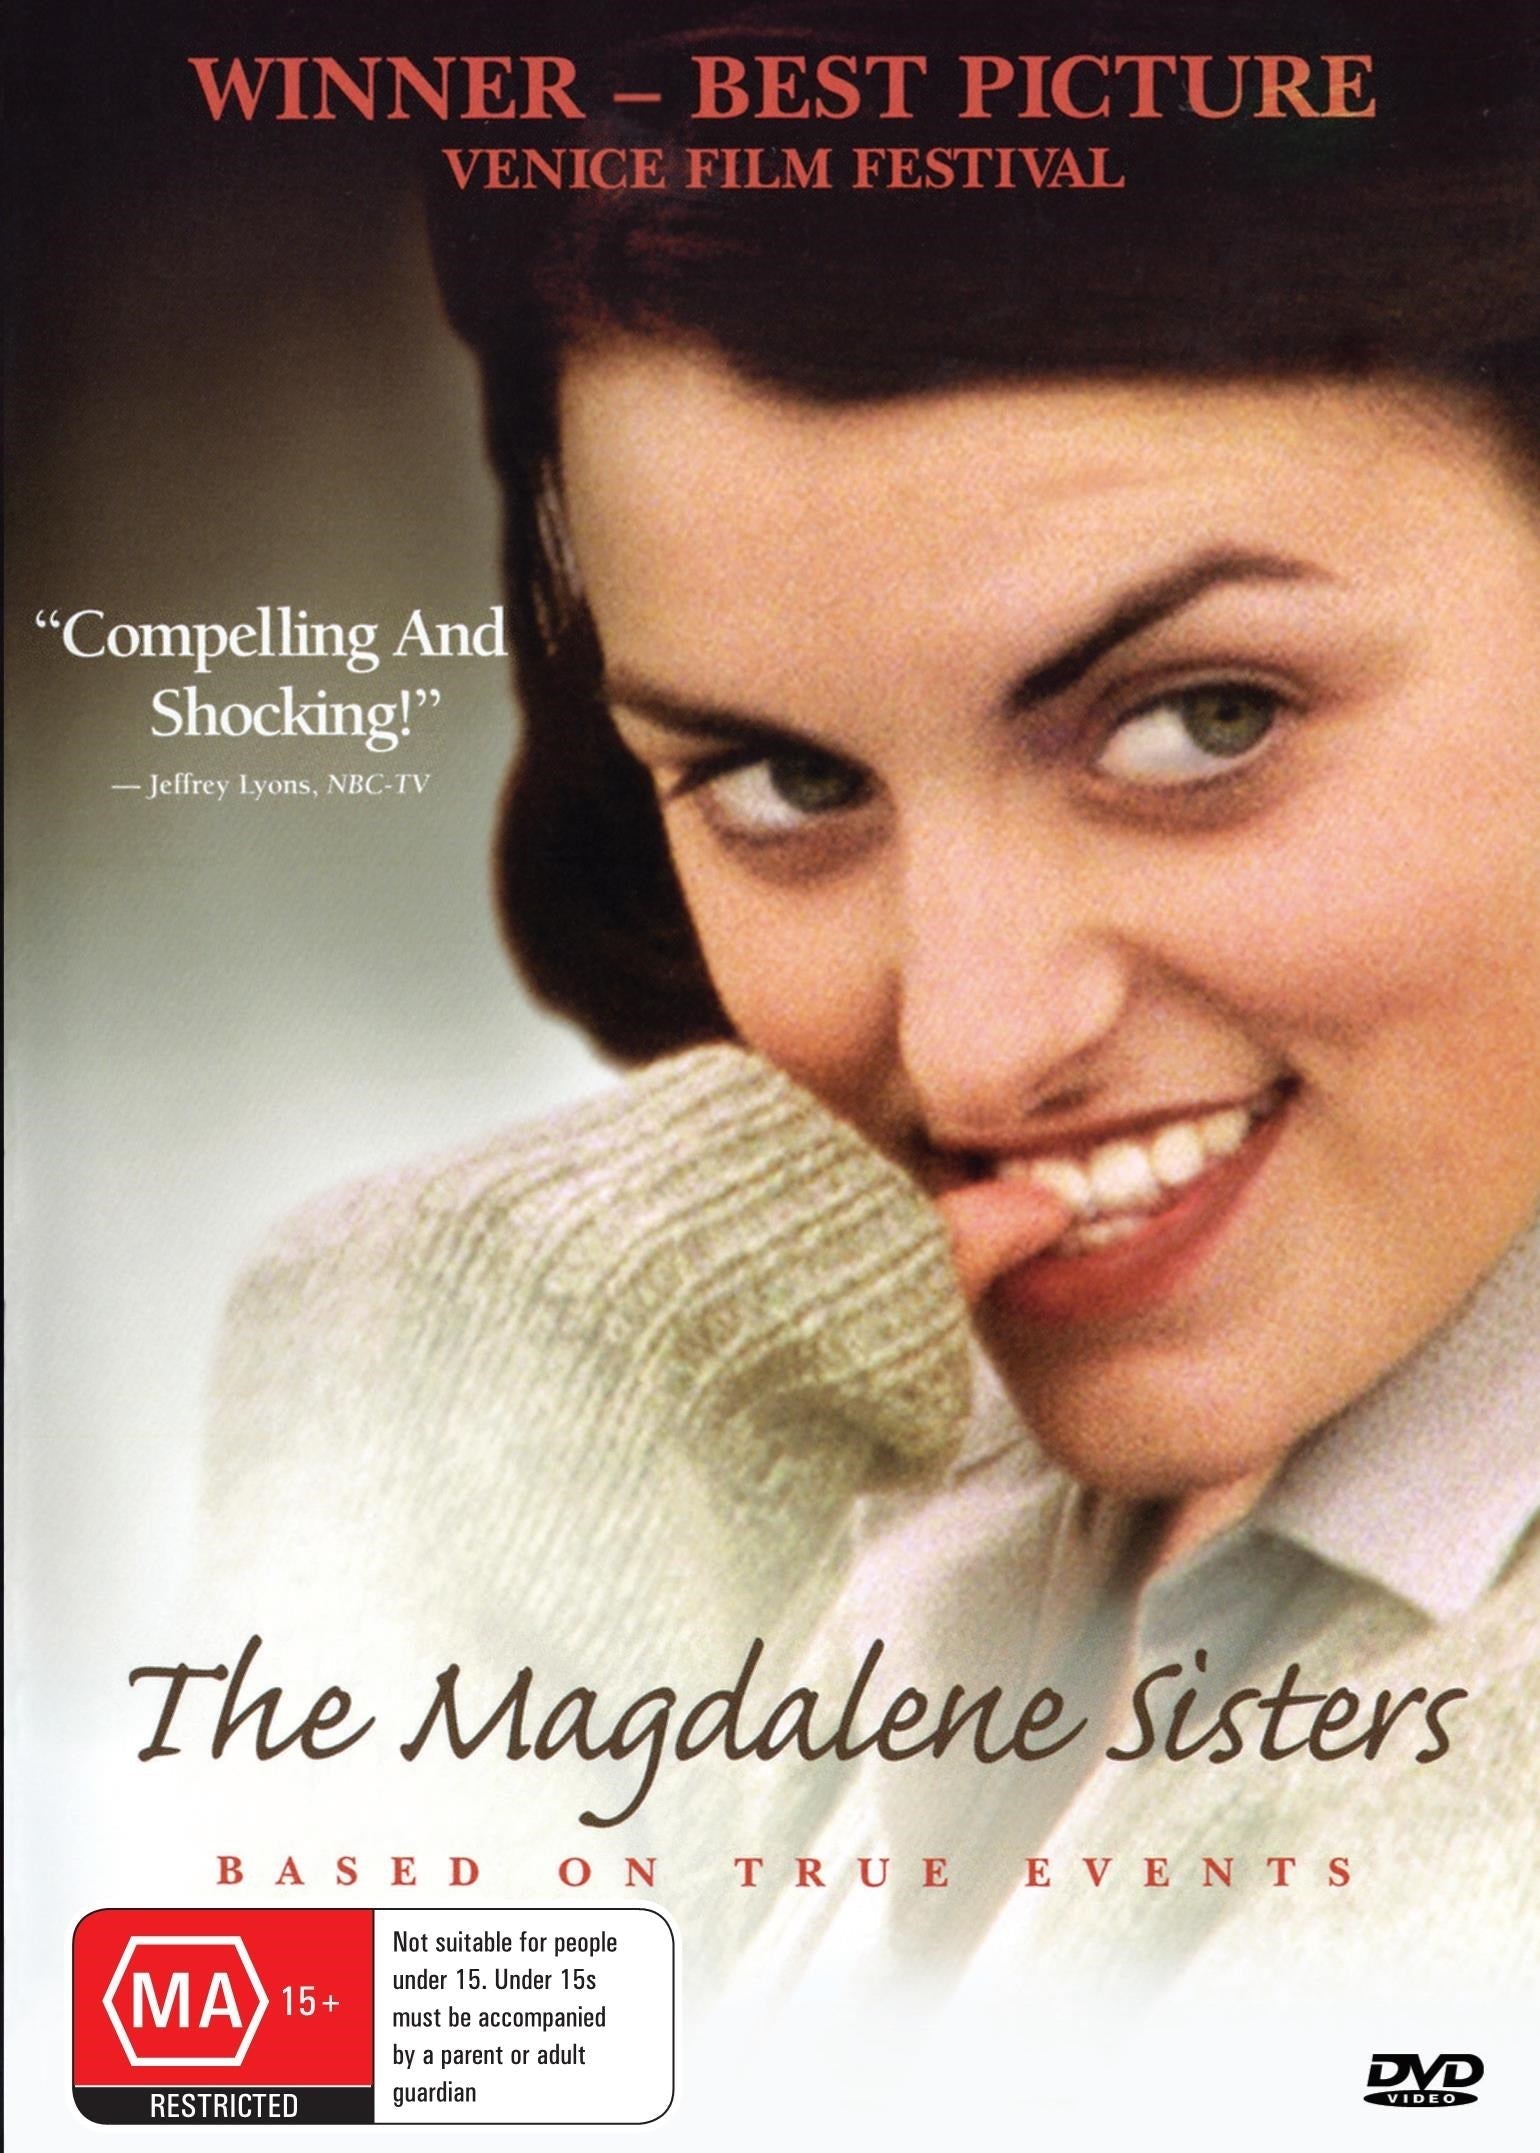 The Magdalene Sisters rareandcollectibledvds